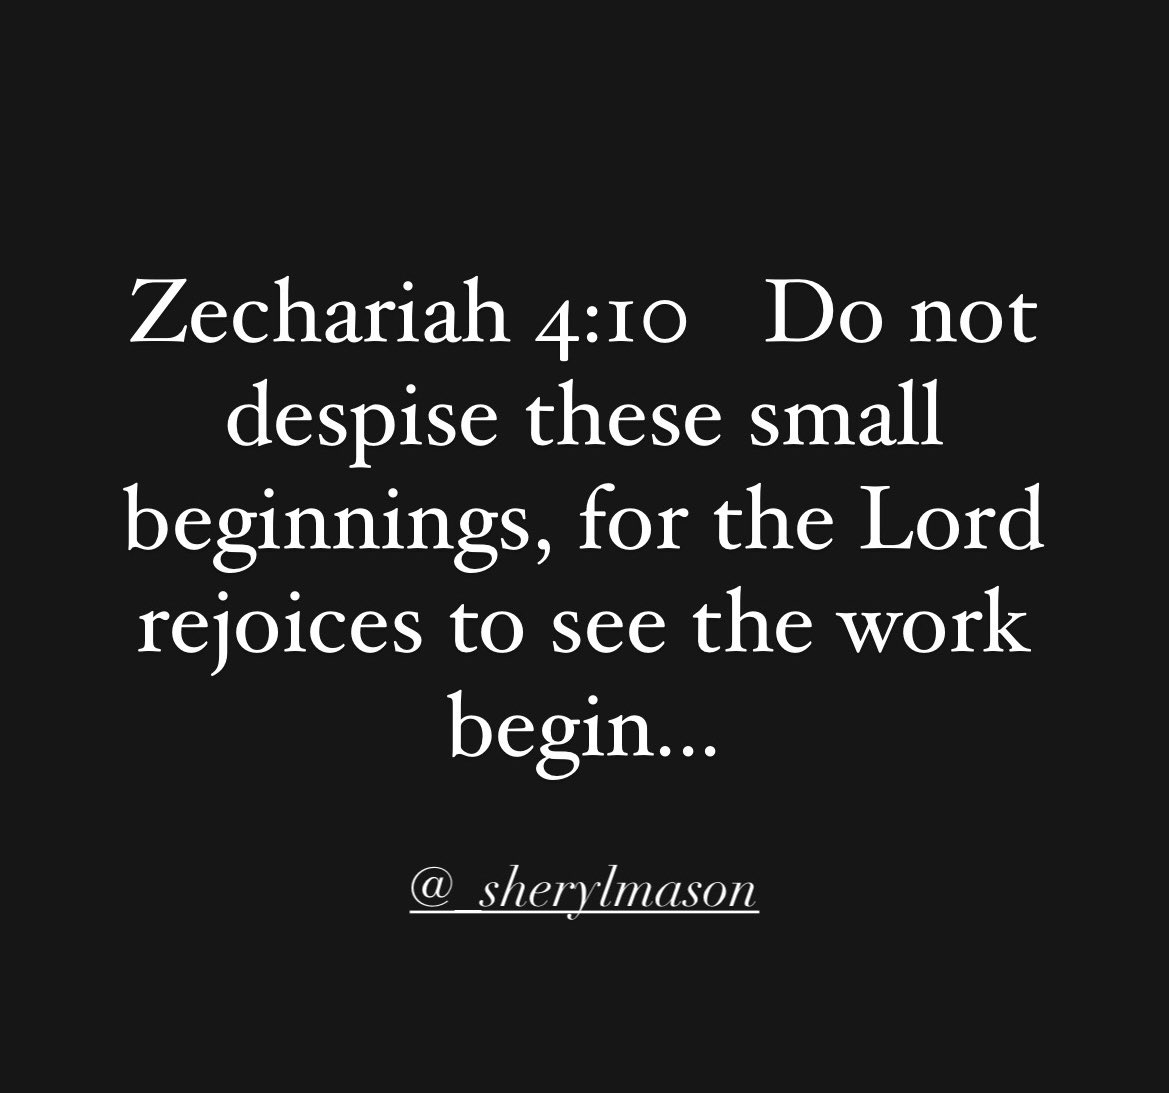 Don't despise small beginnings but rather anticipate the joy of the completion of the task.
#RestWellTonight